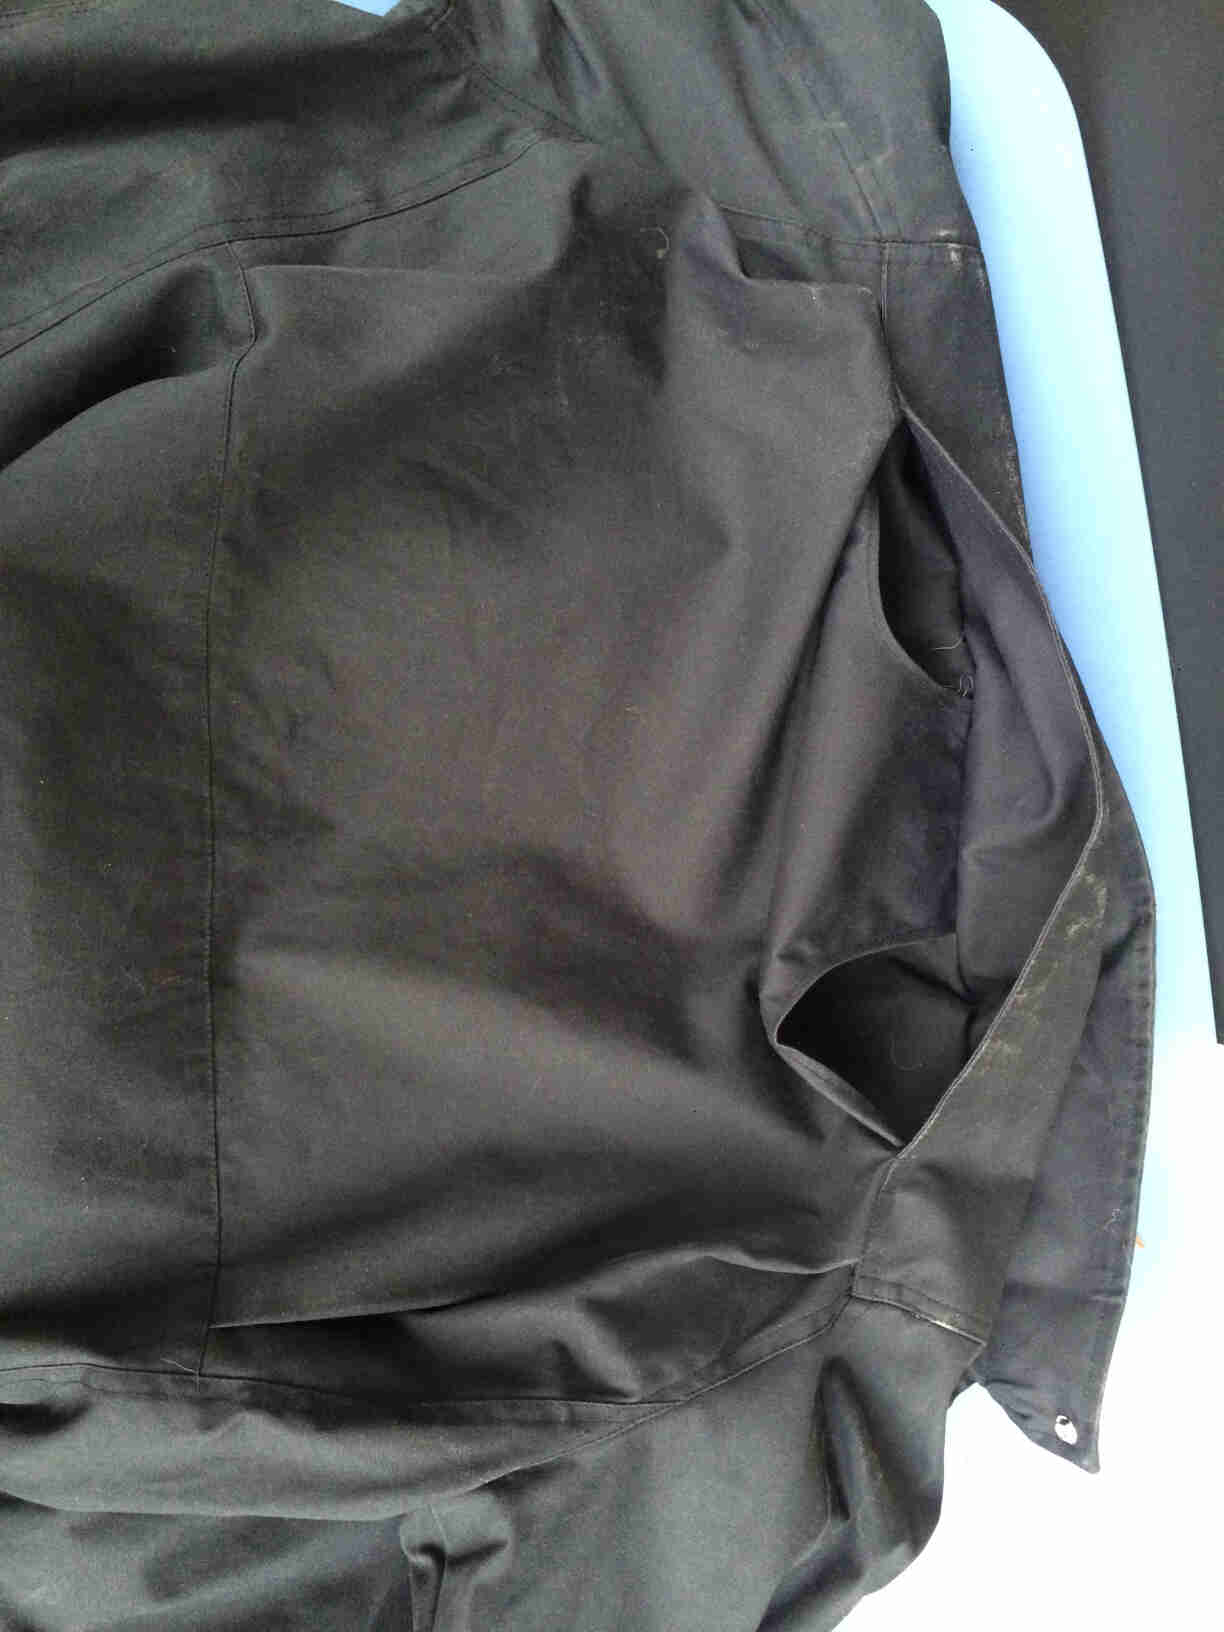 Surly Winter Riding Jacket - rear vent detail - downward view